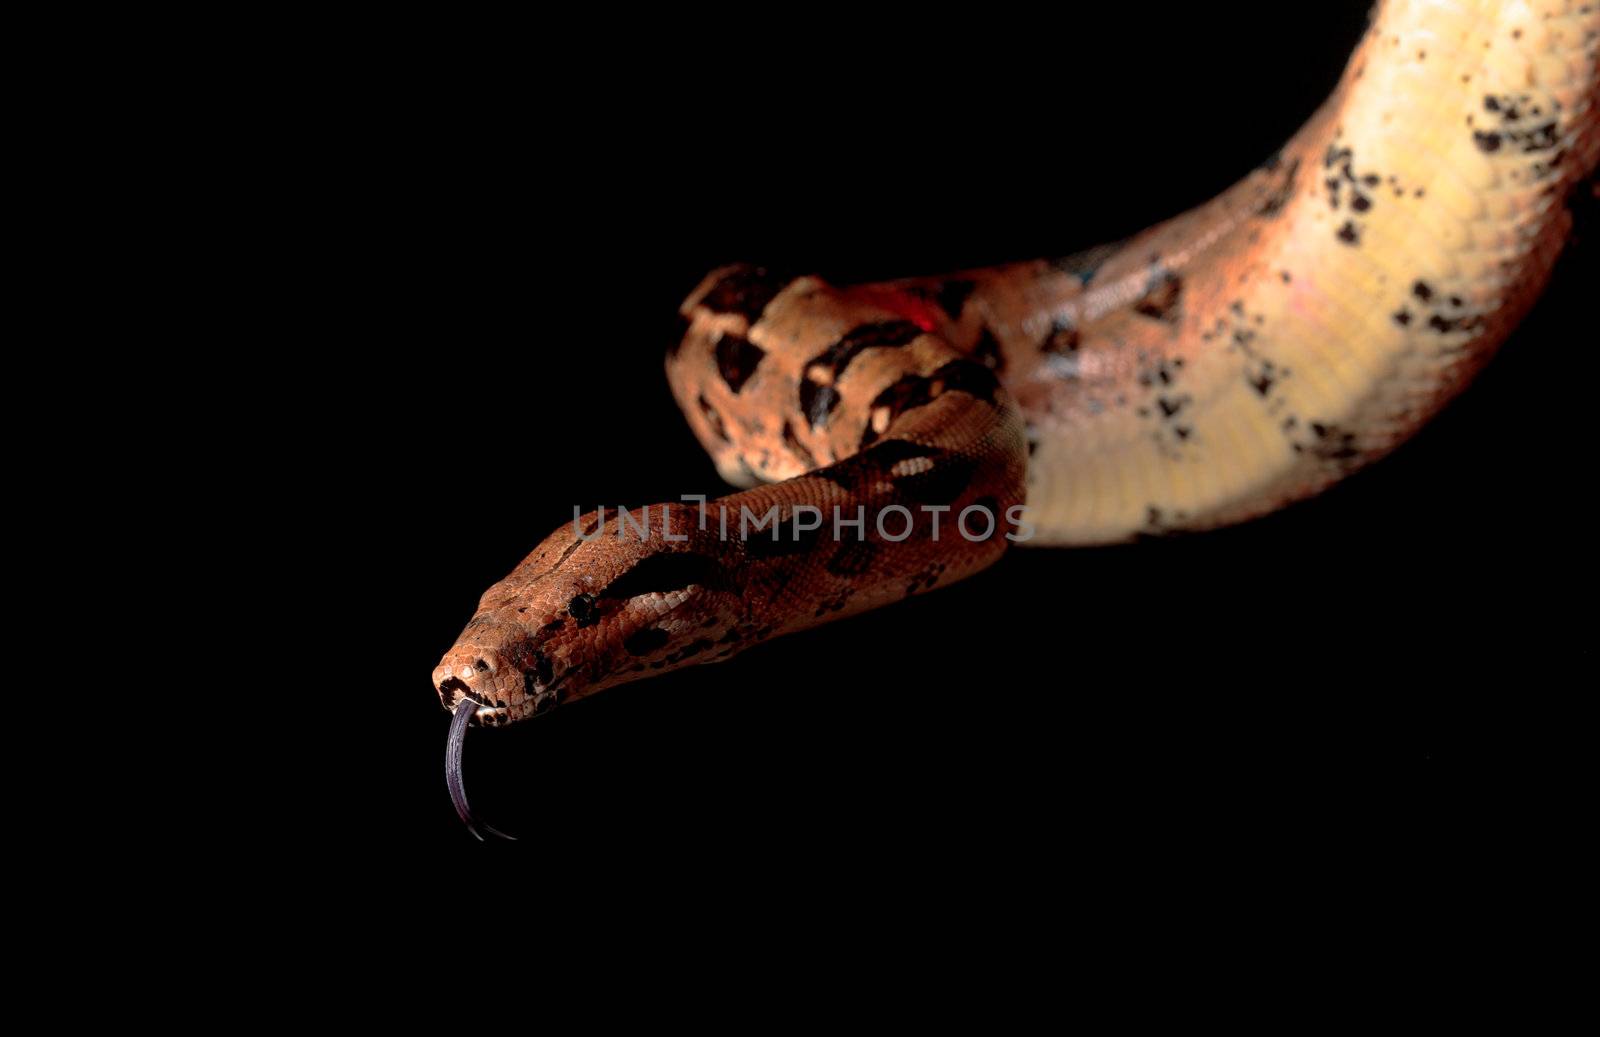 Boa Head with his Tongue hanging, closeup on black background